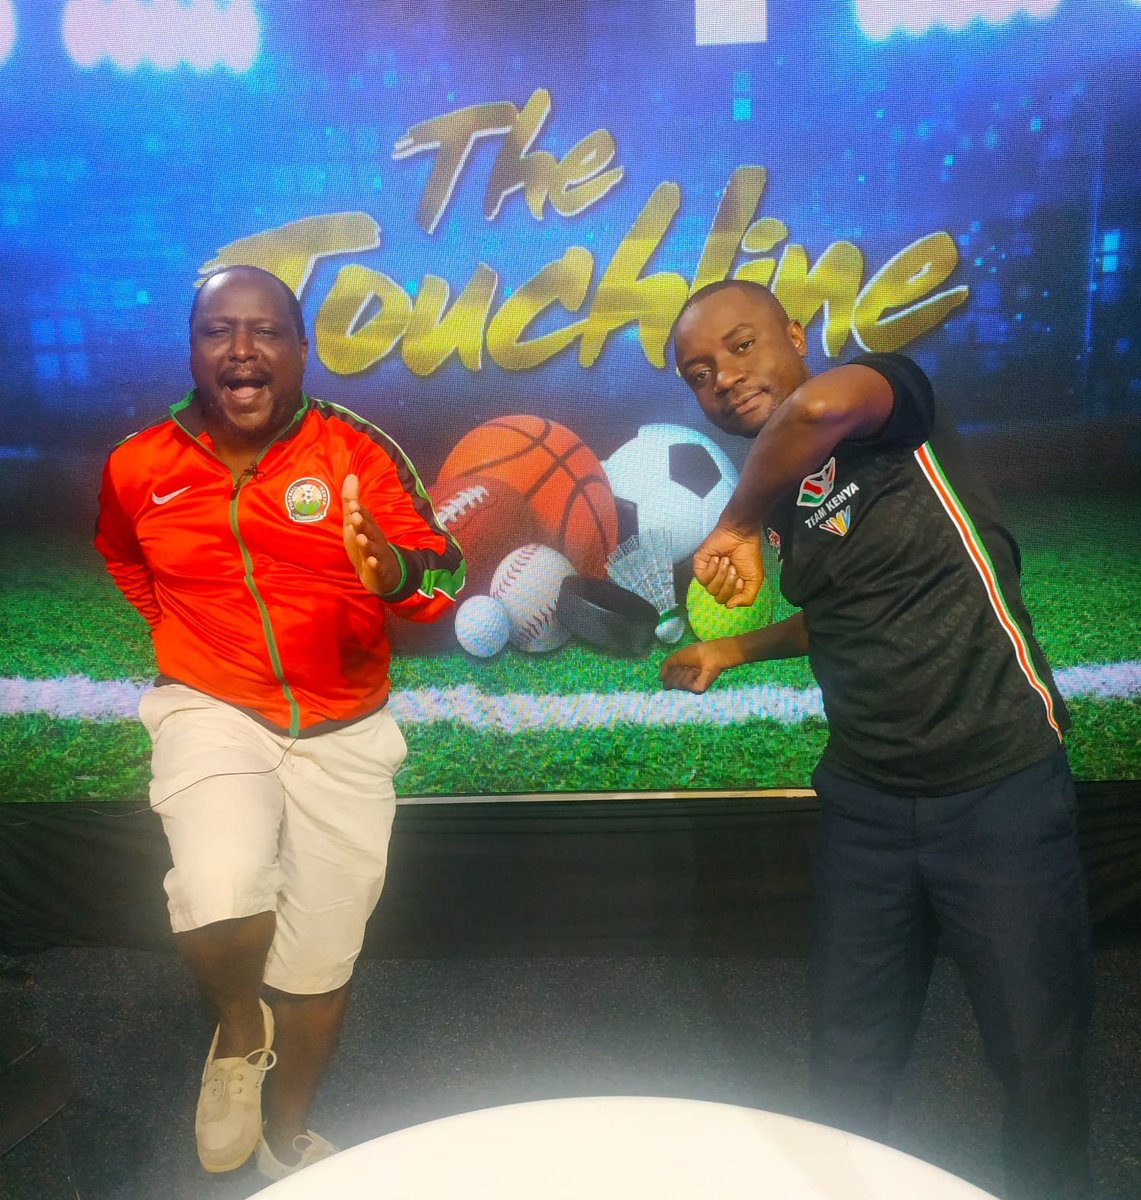 We bring you exclusive stories on #Touchline show with Bernard Okumu and Tiras Waiyaki. Join us from 1pm-3pm and tell us where you are watching from.